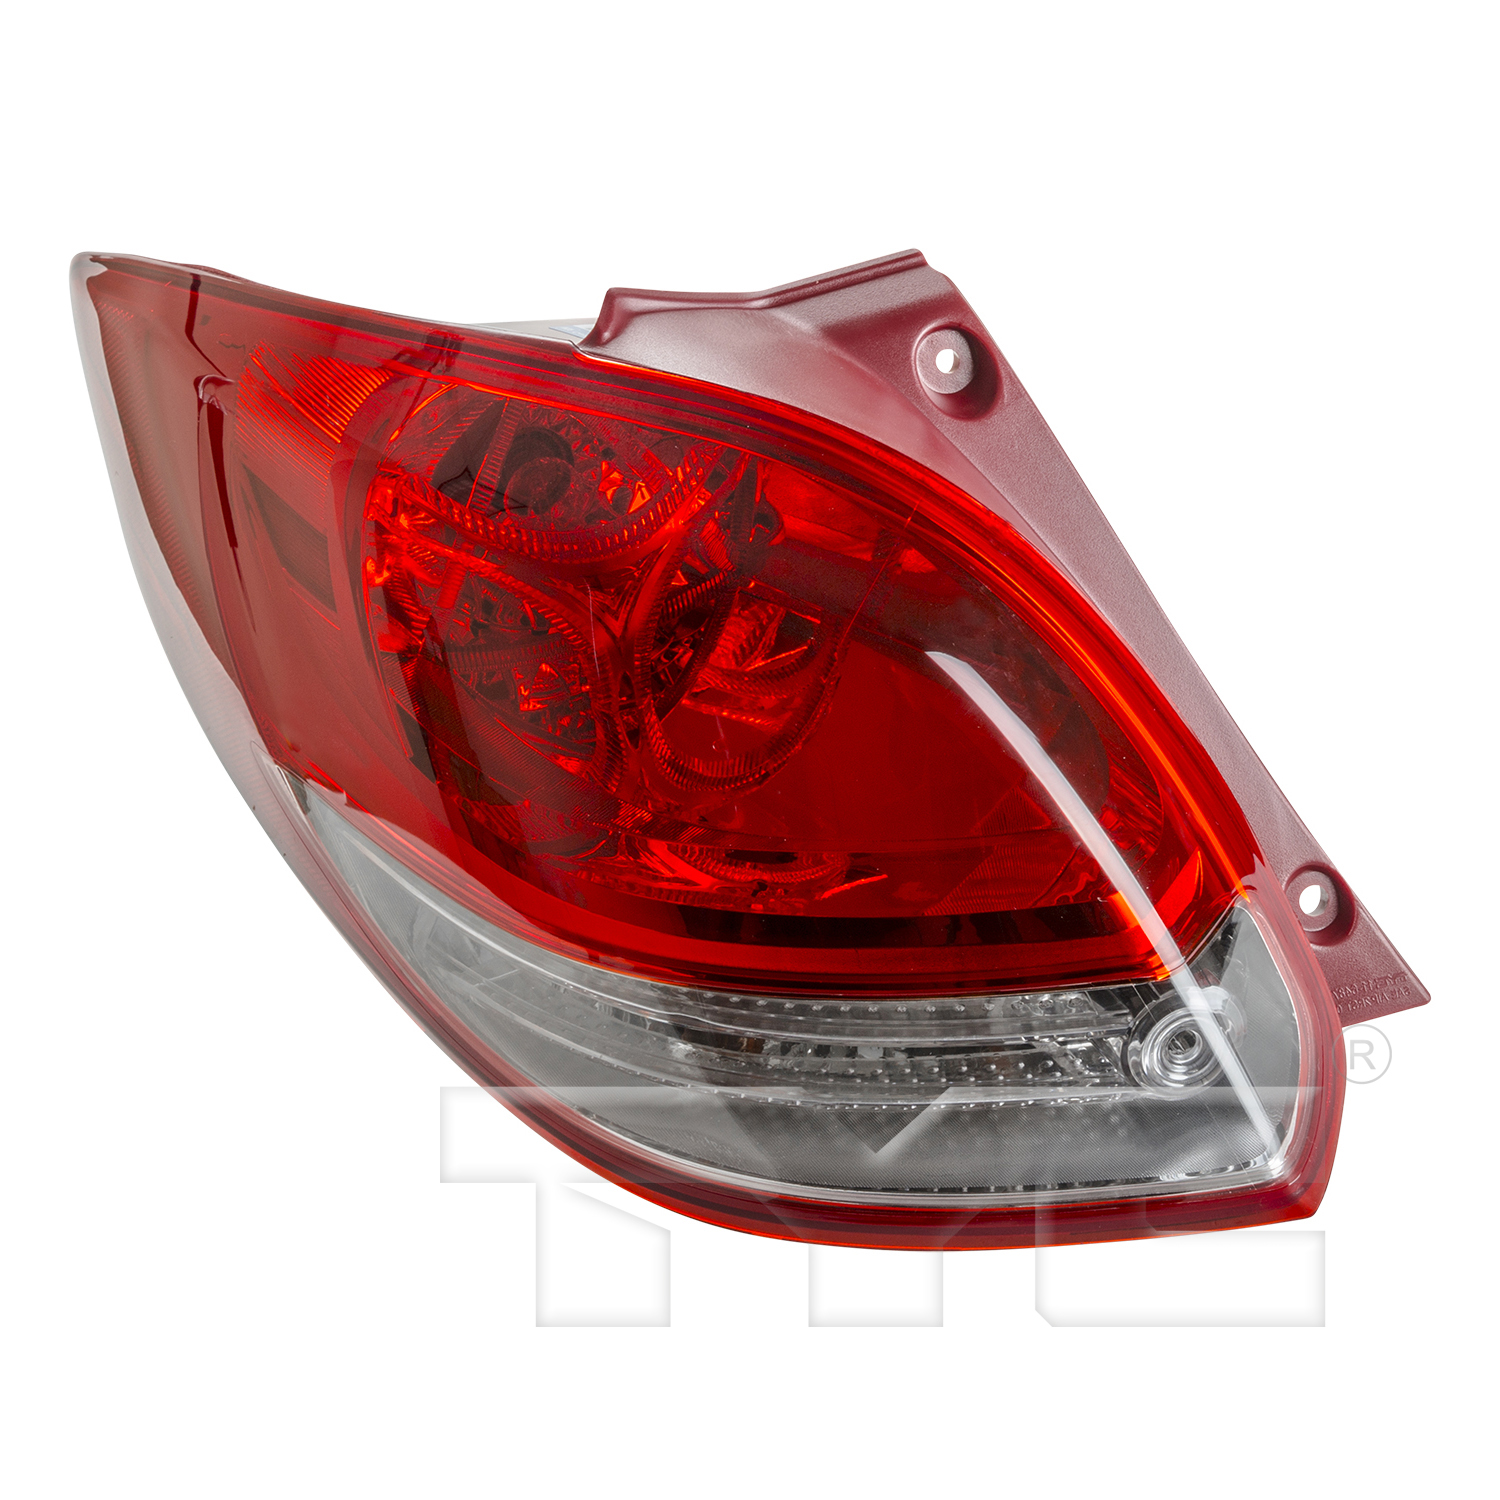 Aftermarket TAILLIGHTS for HYUNDAI - VELOSTER, VELOSTER,12-17,LT Taillamp assy